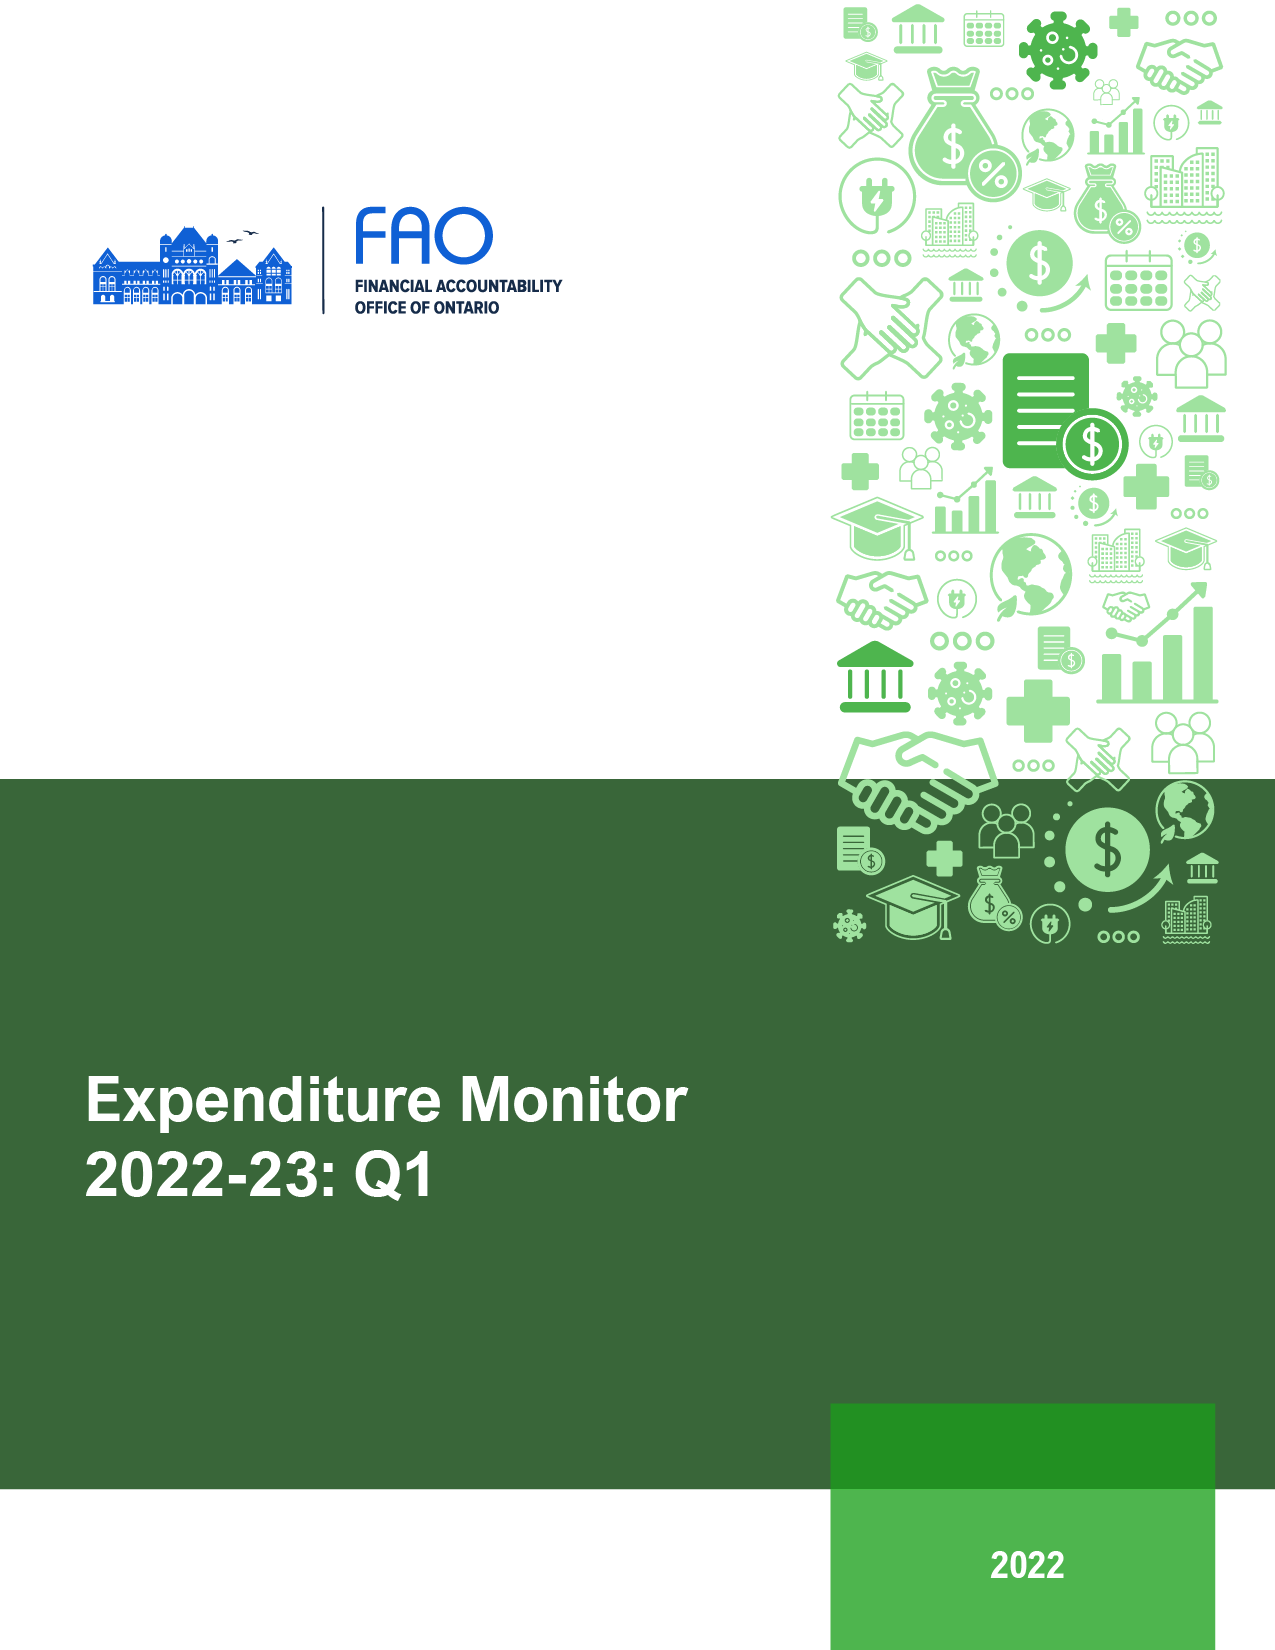 Expenditure Monitor 2022-23: Q1 report cover